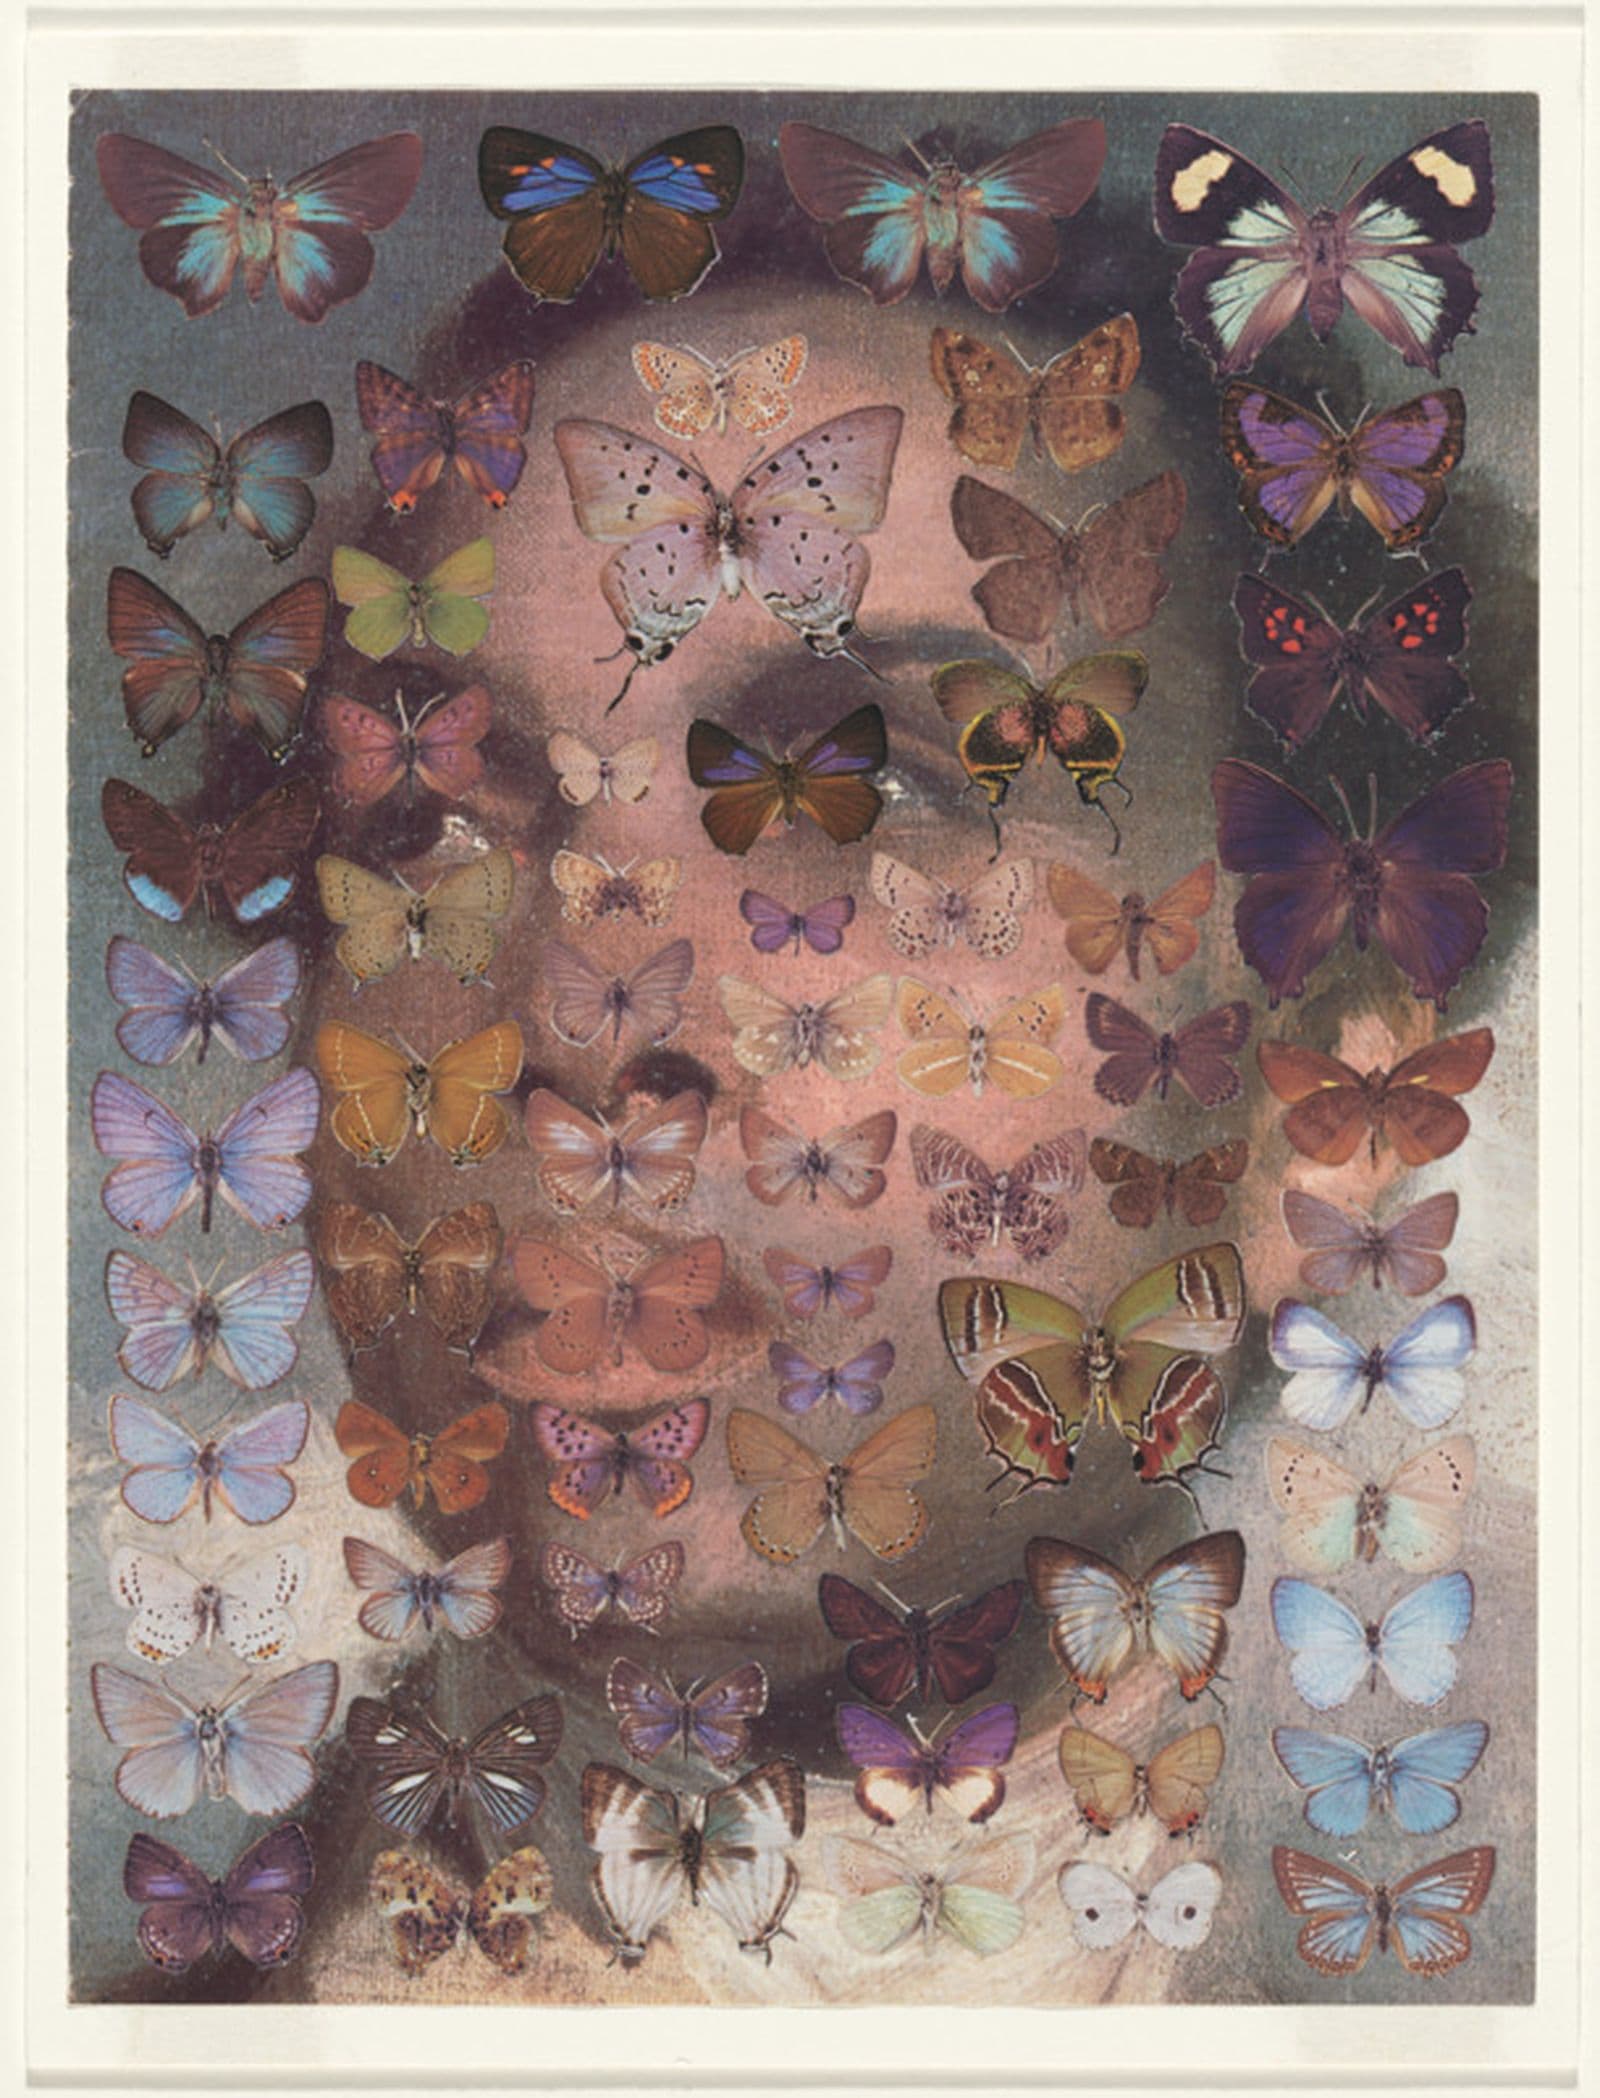 A portrait of a man with a collage of butterflies on top